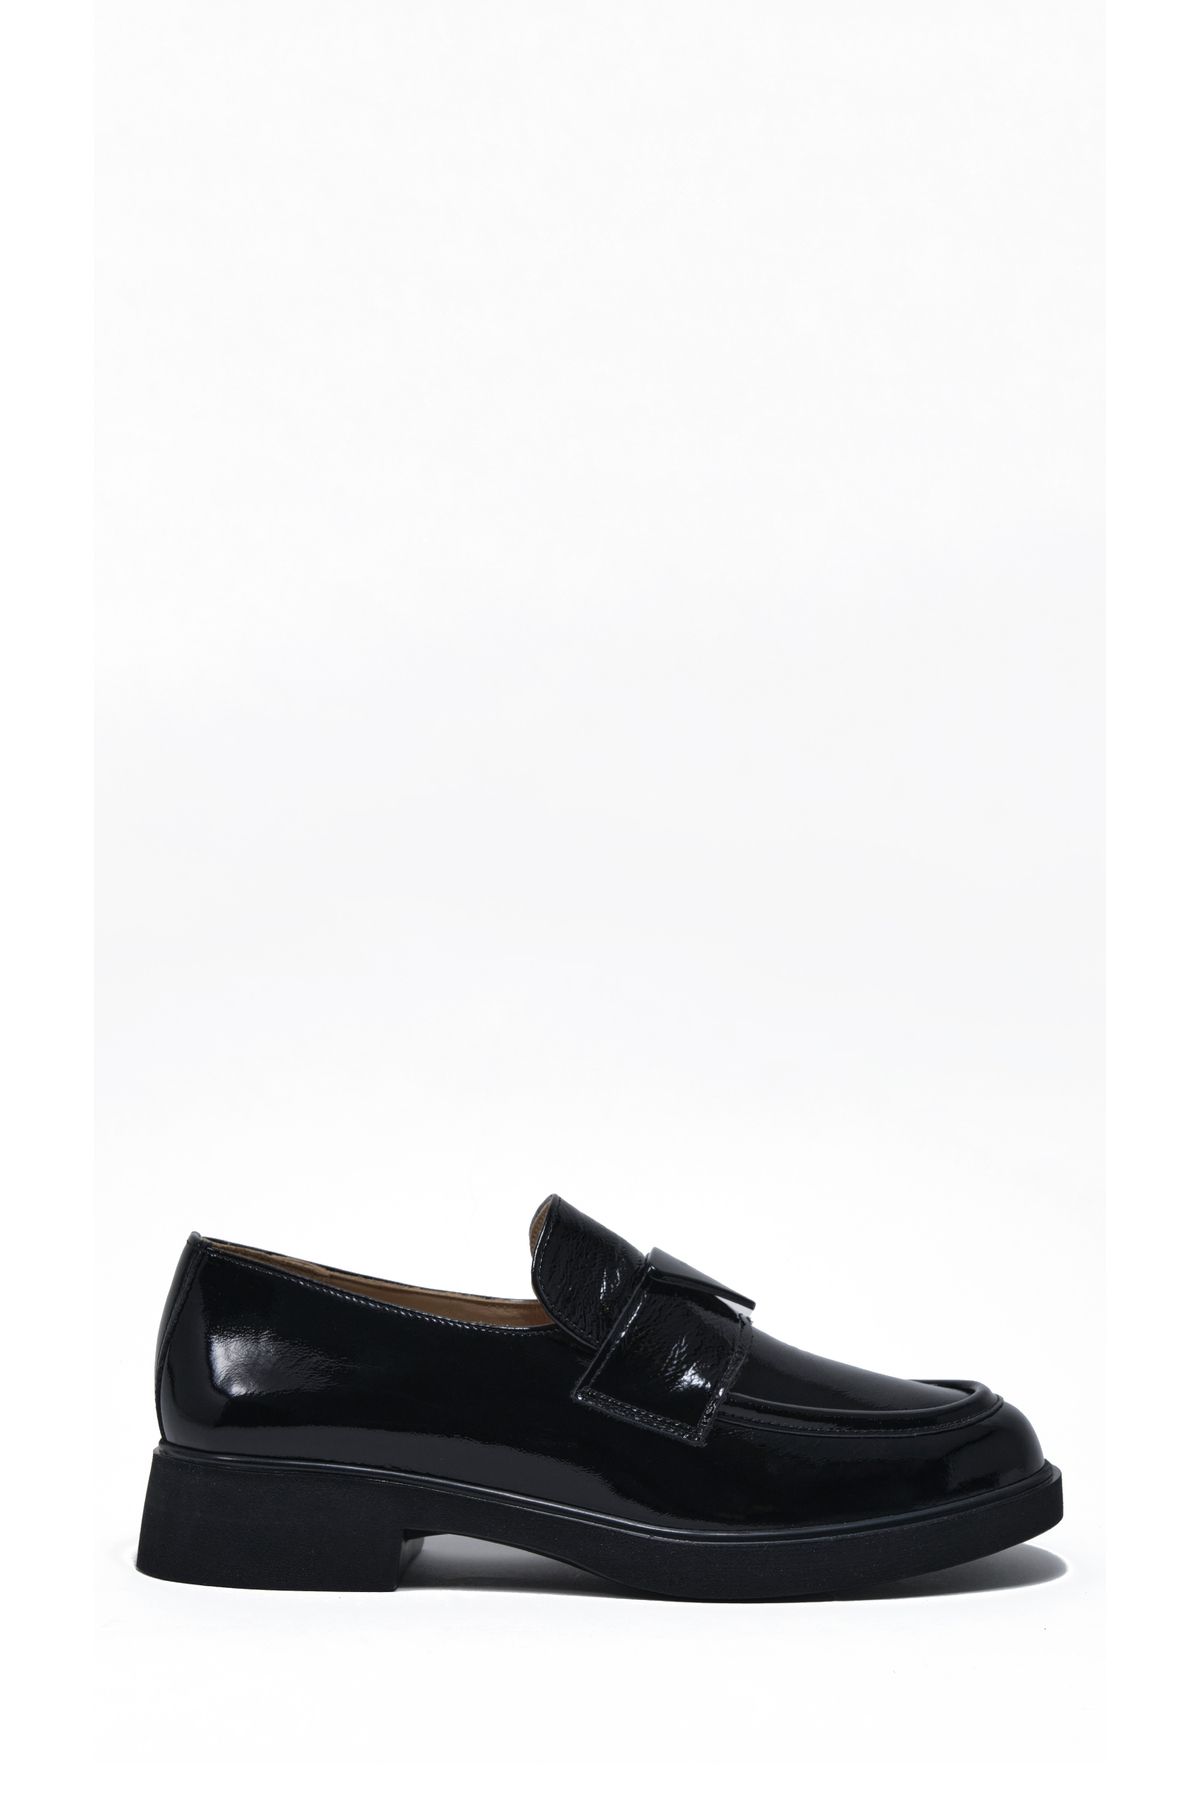 Gizzelli shoes Loafer